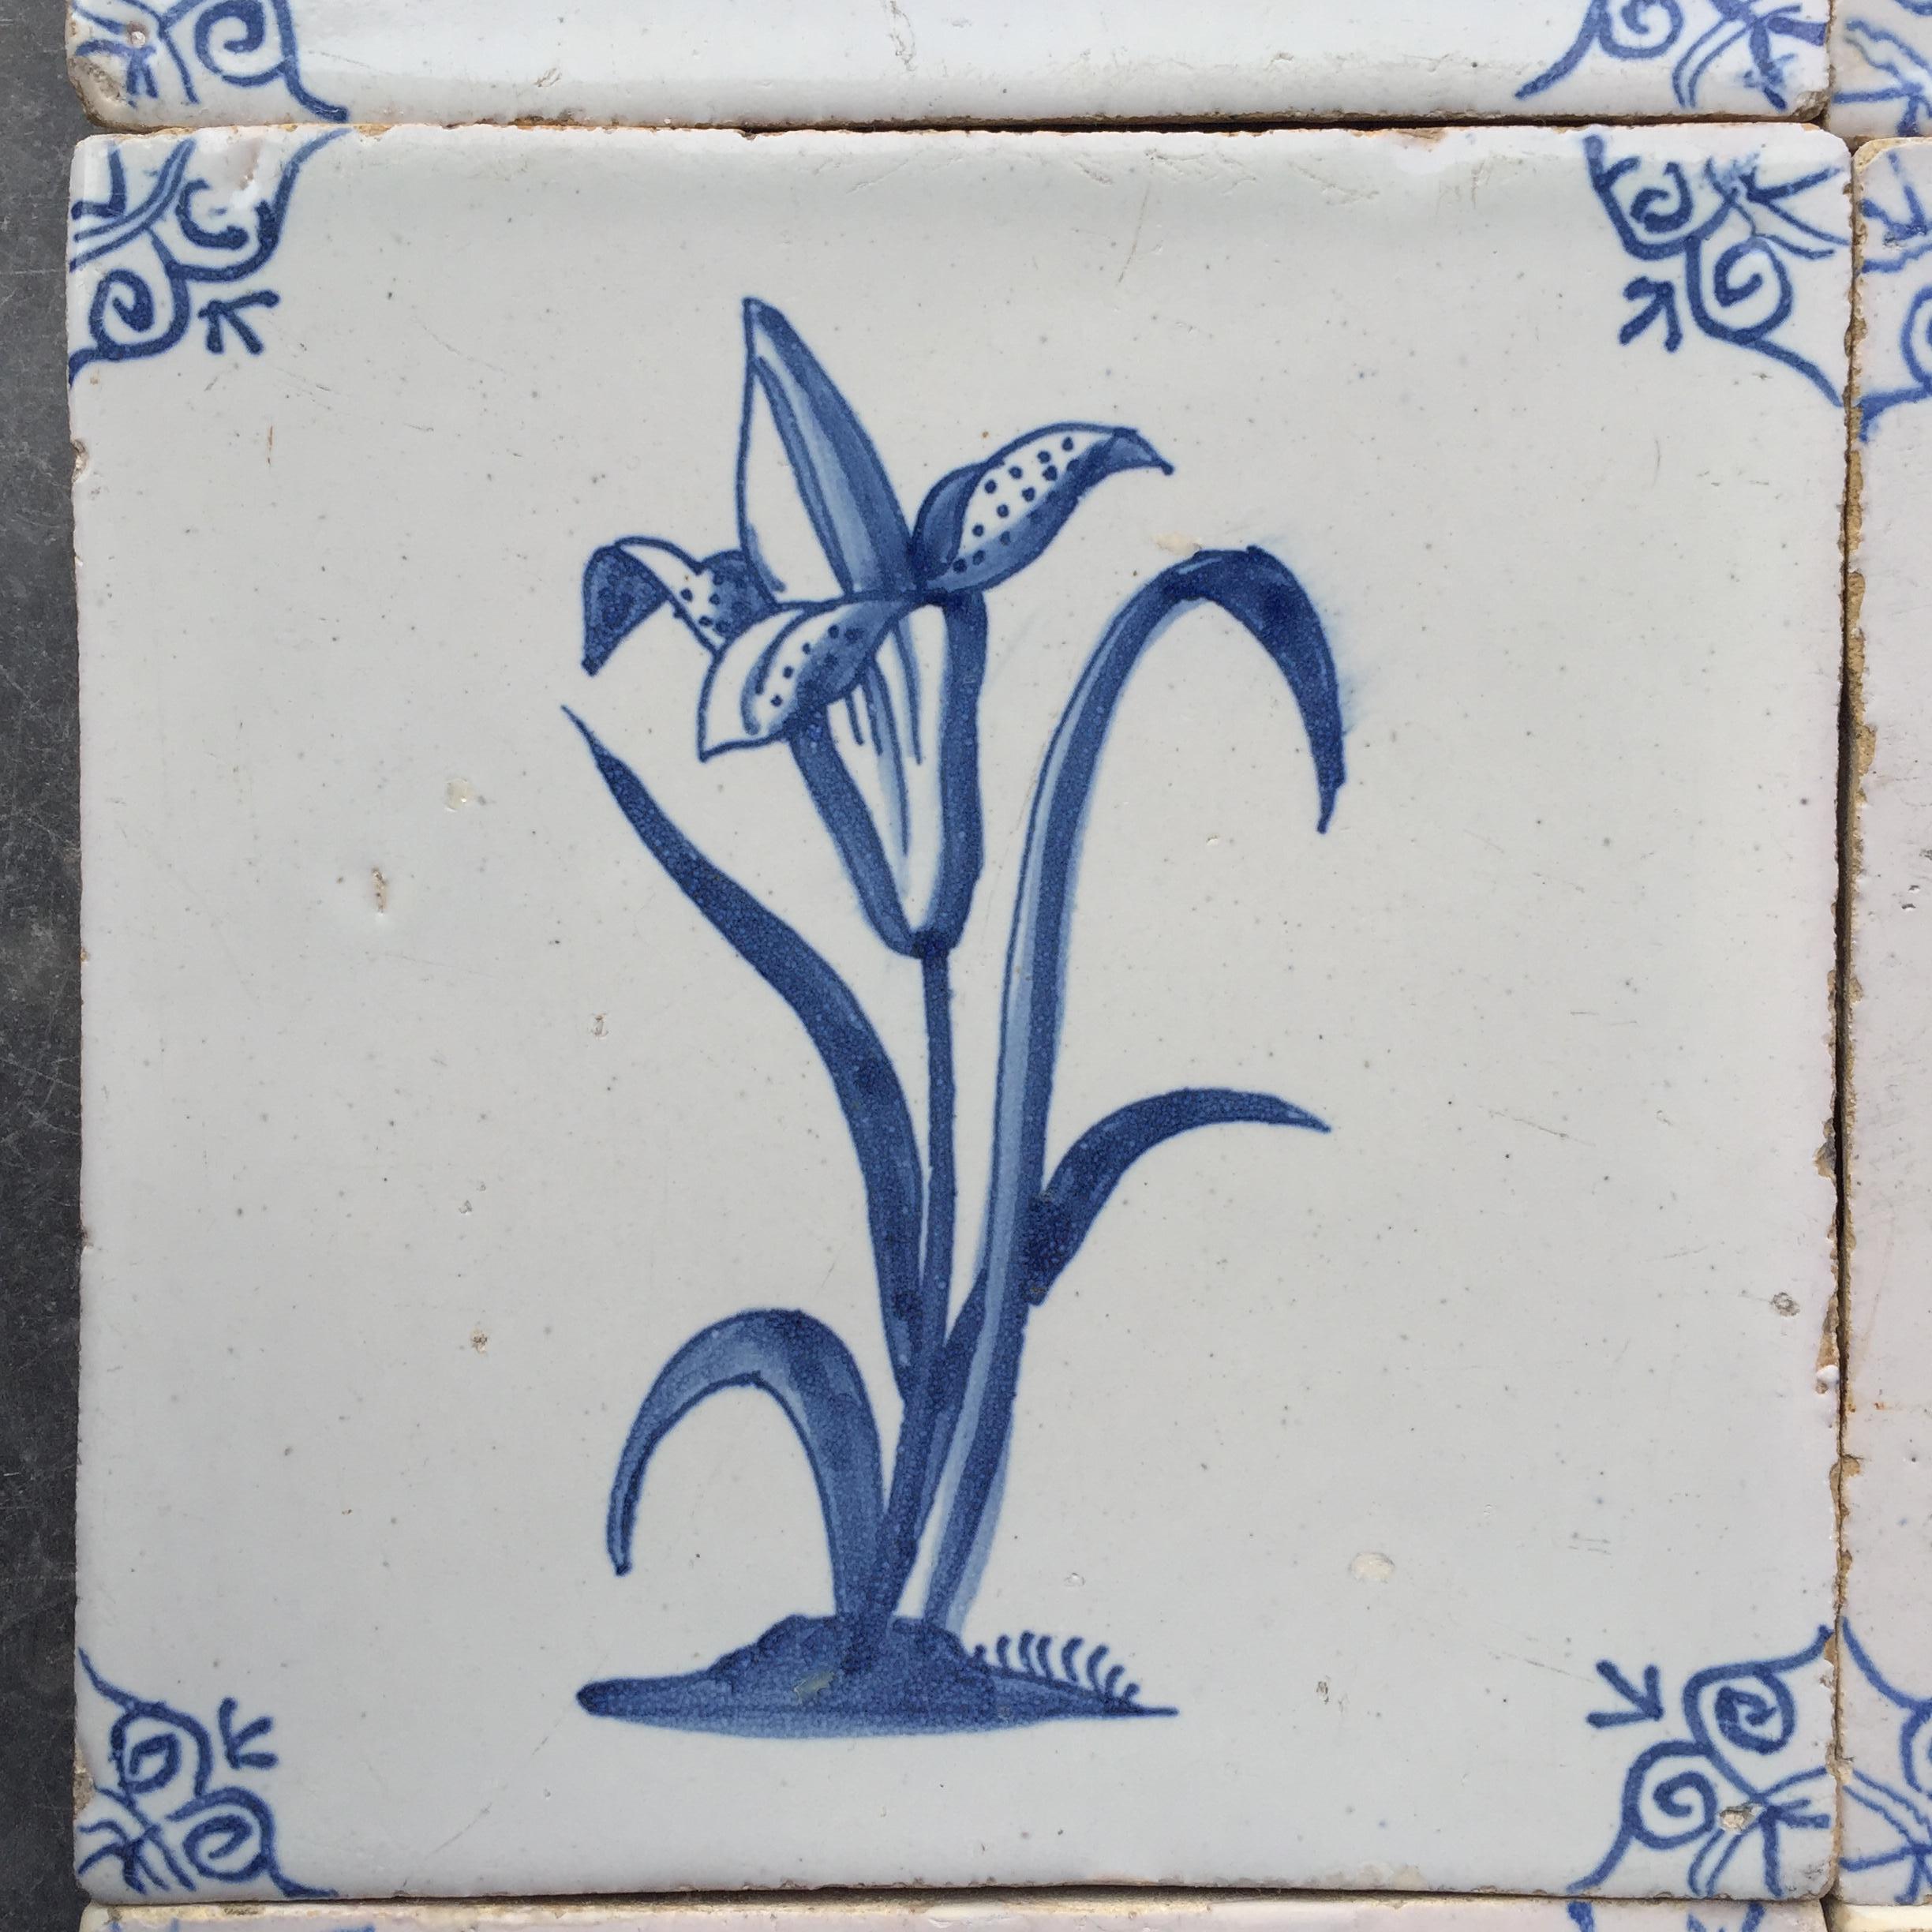 Rare Set of 12 Dutch Delft Tiles with Flowers and Insects, 17th Century 6